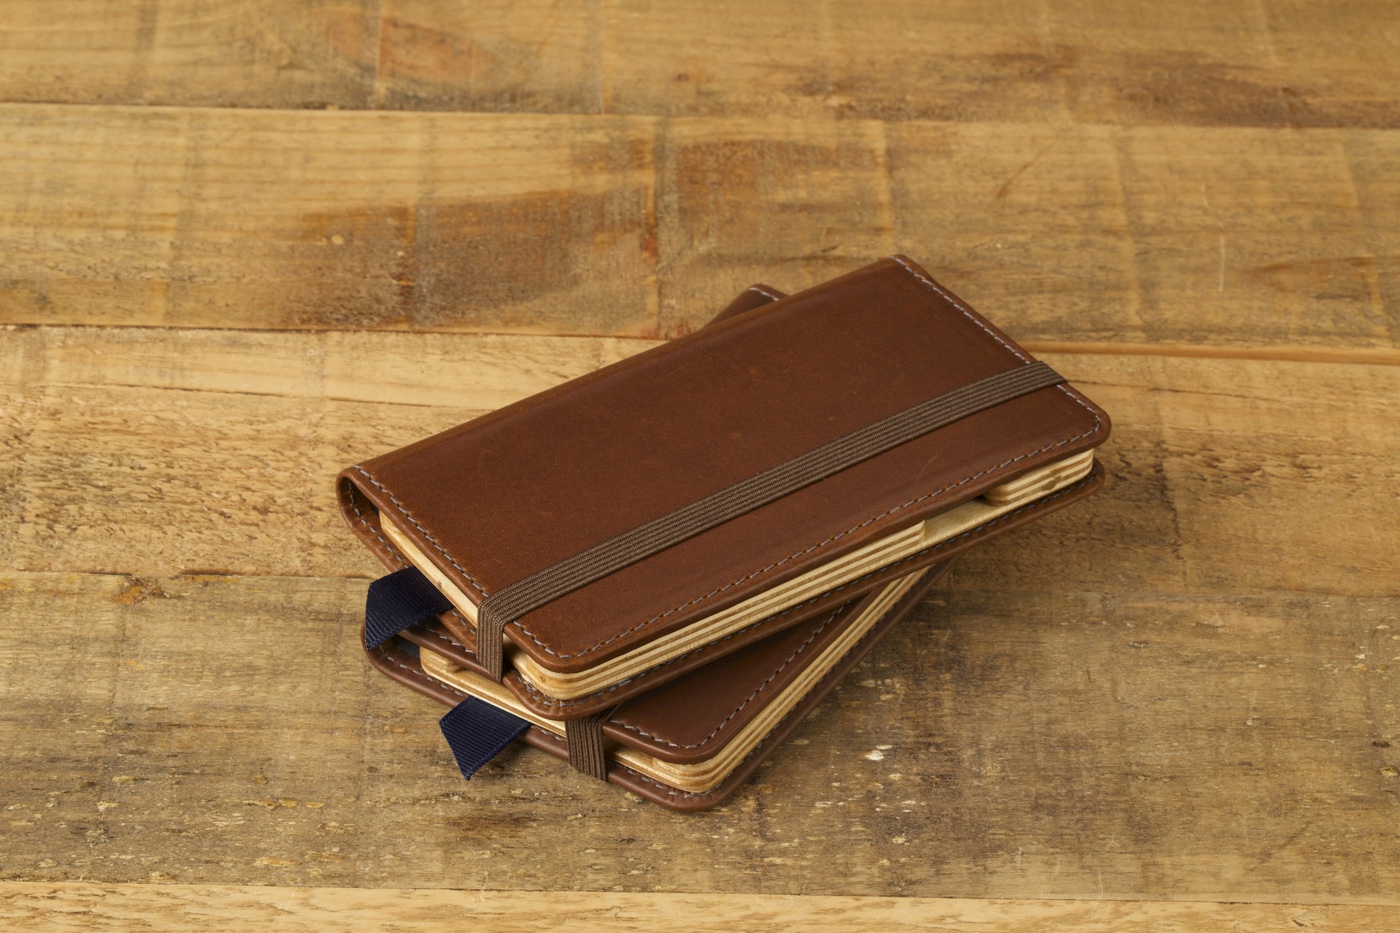 Pad & Quill Giveaway! – Win Your Choice of an iPhone Wallet Case or Apple Watch Hardwood Stand! (UPDATED – We Have Winners!)